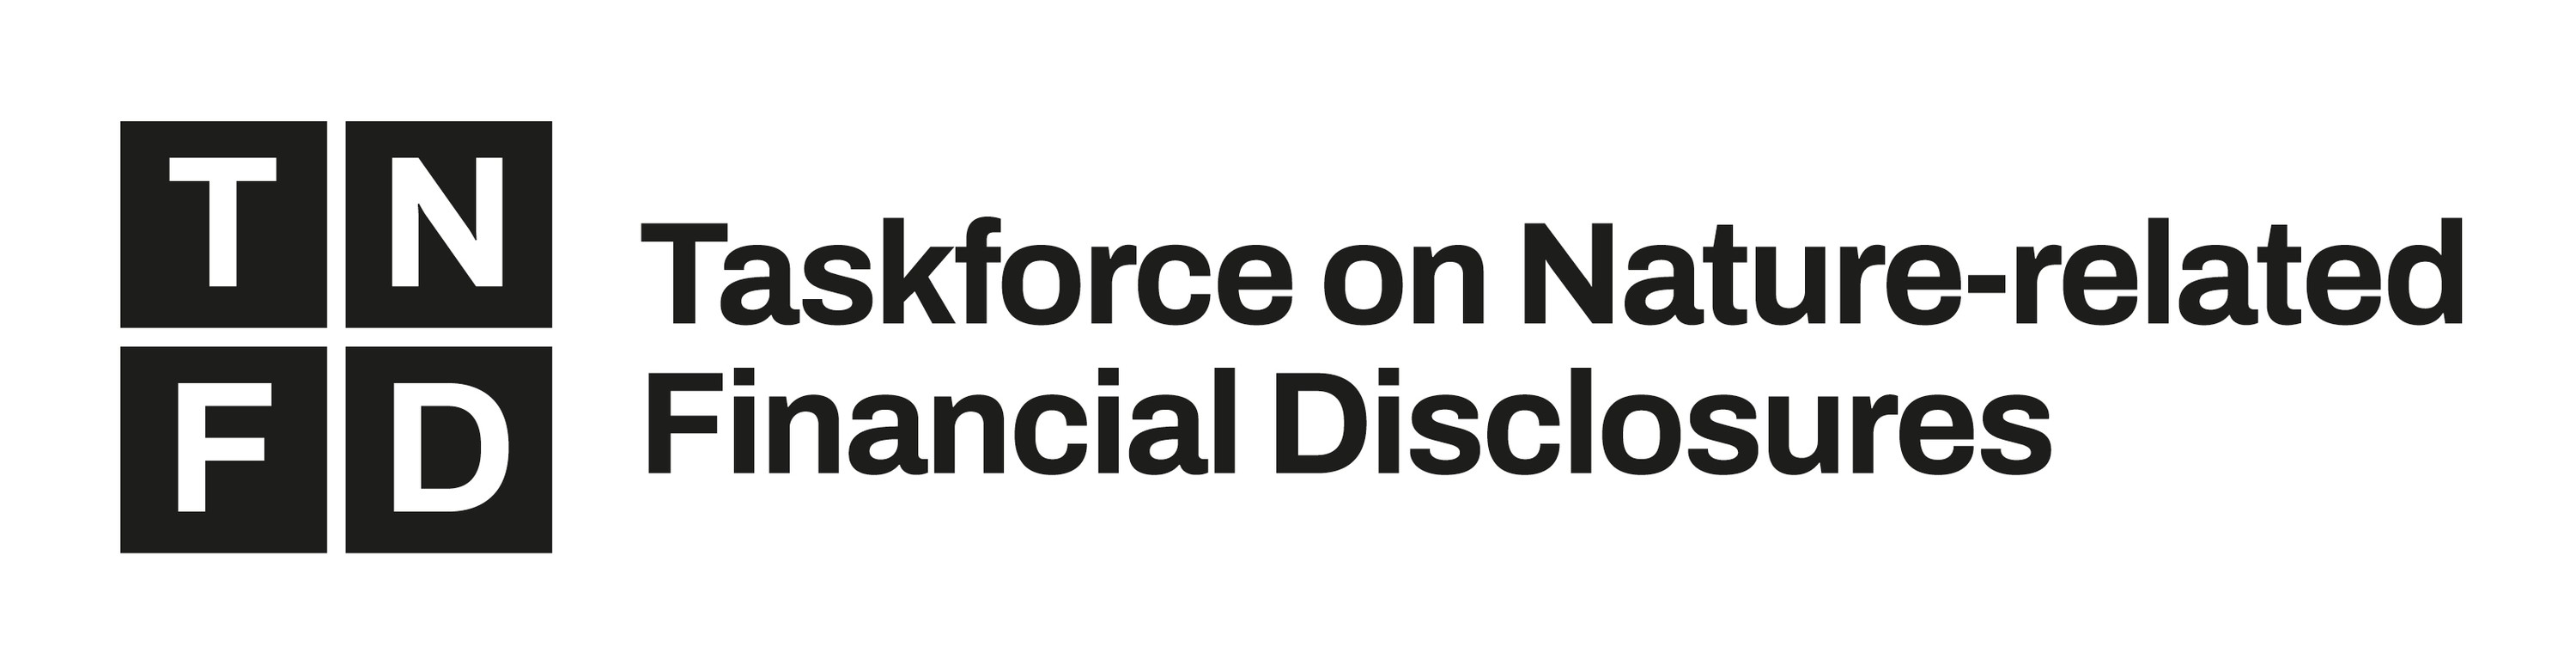 TNFD (The Taskforce on Nature-related Financial Disclosures)